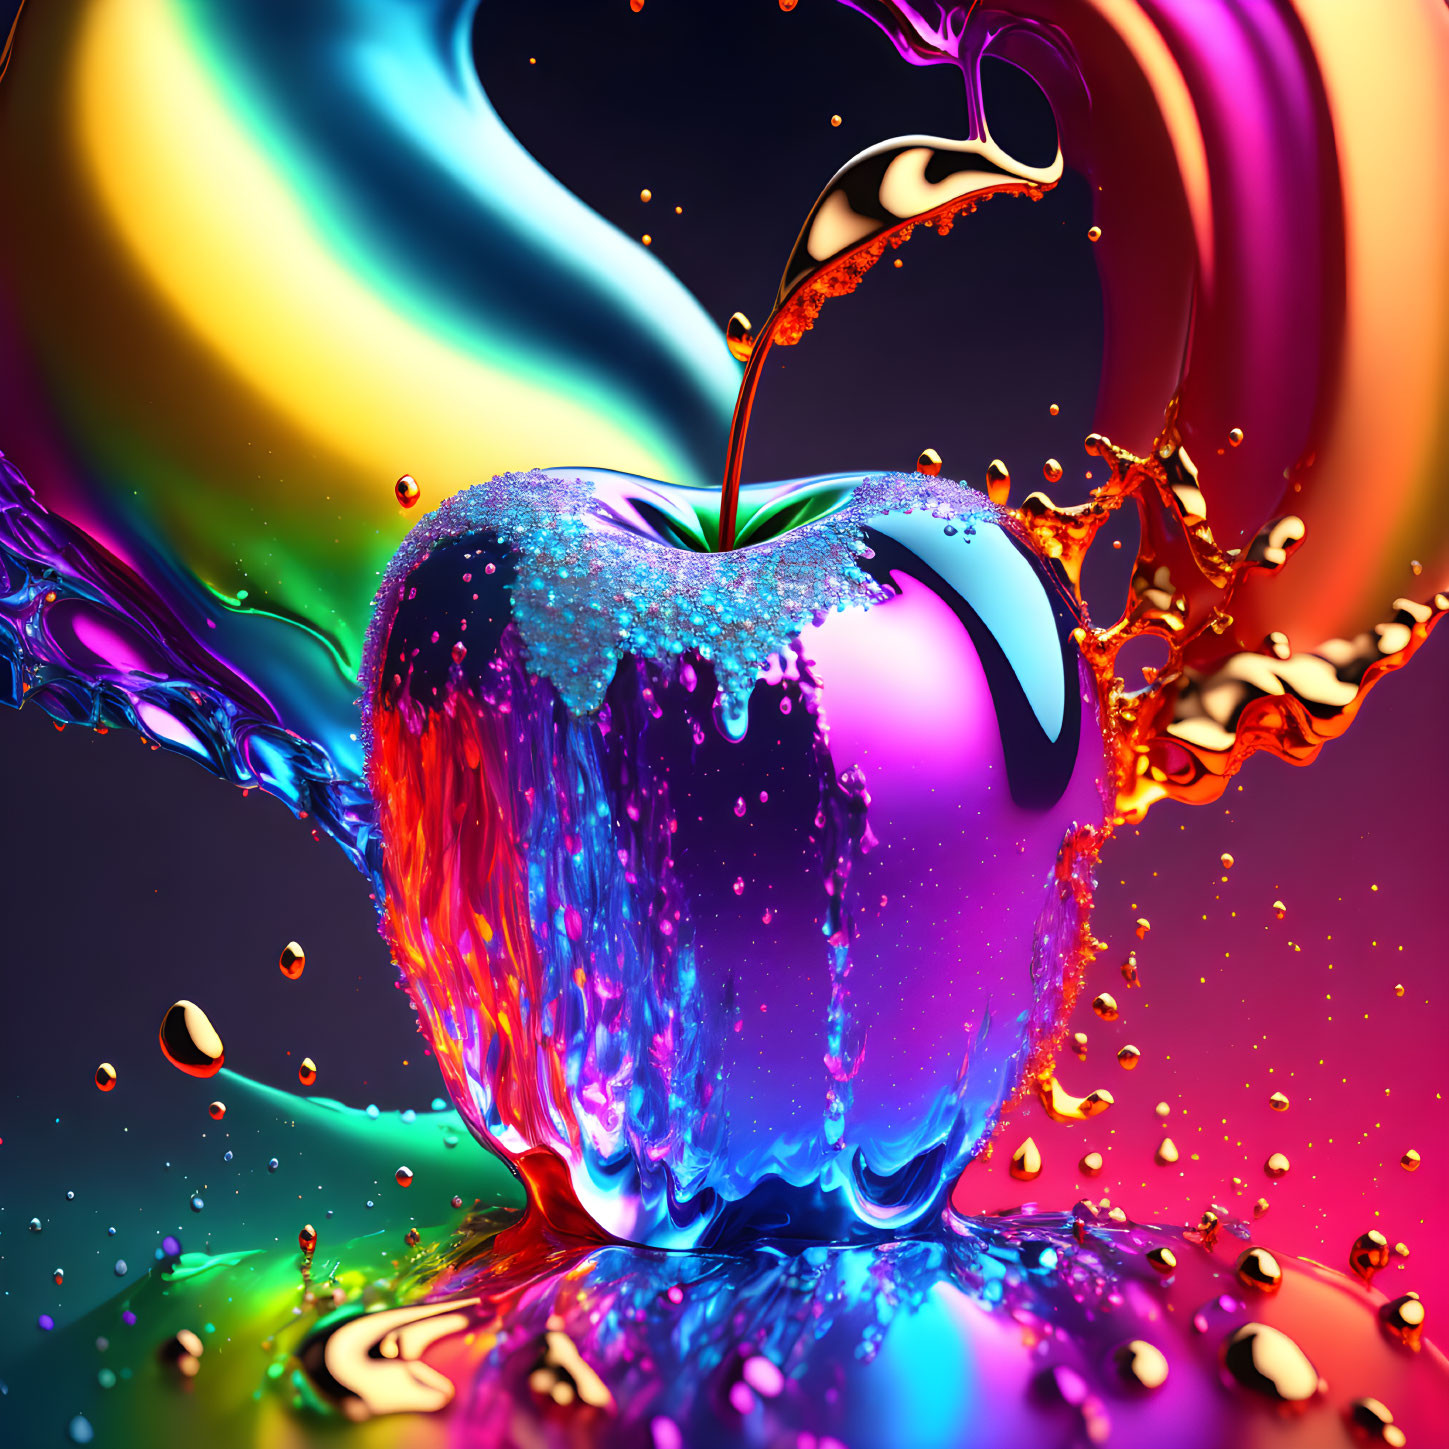 Colorful Apple with Dynamic Liquid Splashes on Multicolored Background